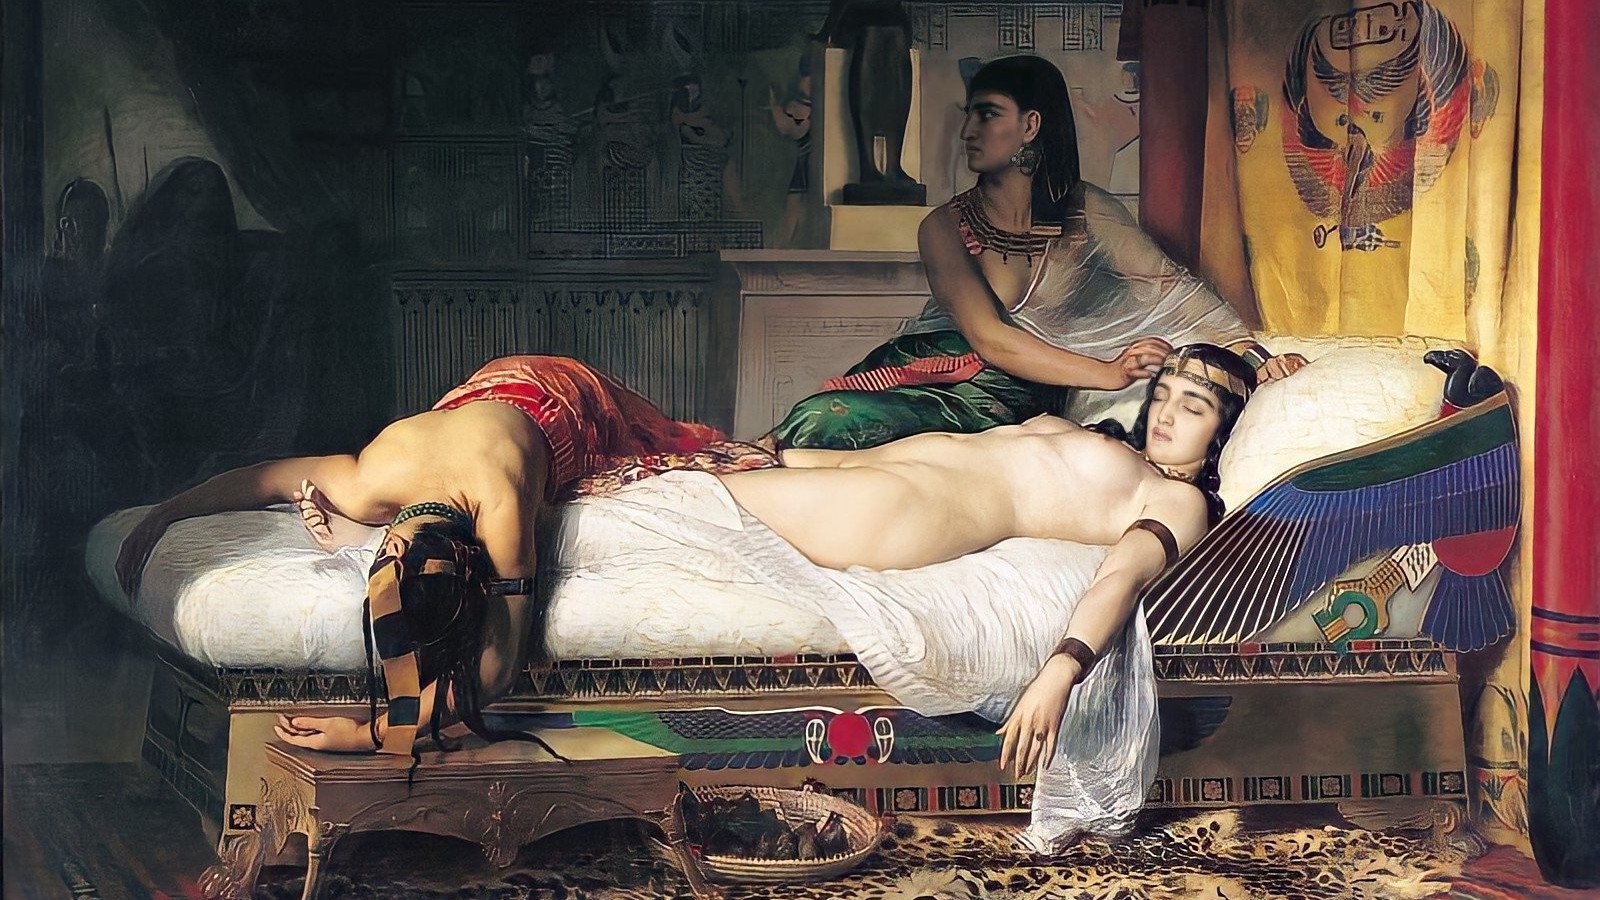 This is a painting entitled The Death of Cleopatra (1874) by Jean-André Rixens.  Cleopatra is lying dead on a bed.  She has long black hair and wears a gold headdress.  There is another corpse at the end of the bed and a person sitting above her, brushing Cleopatra's hair from her face.